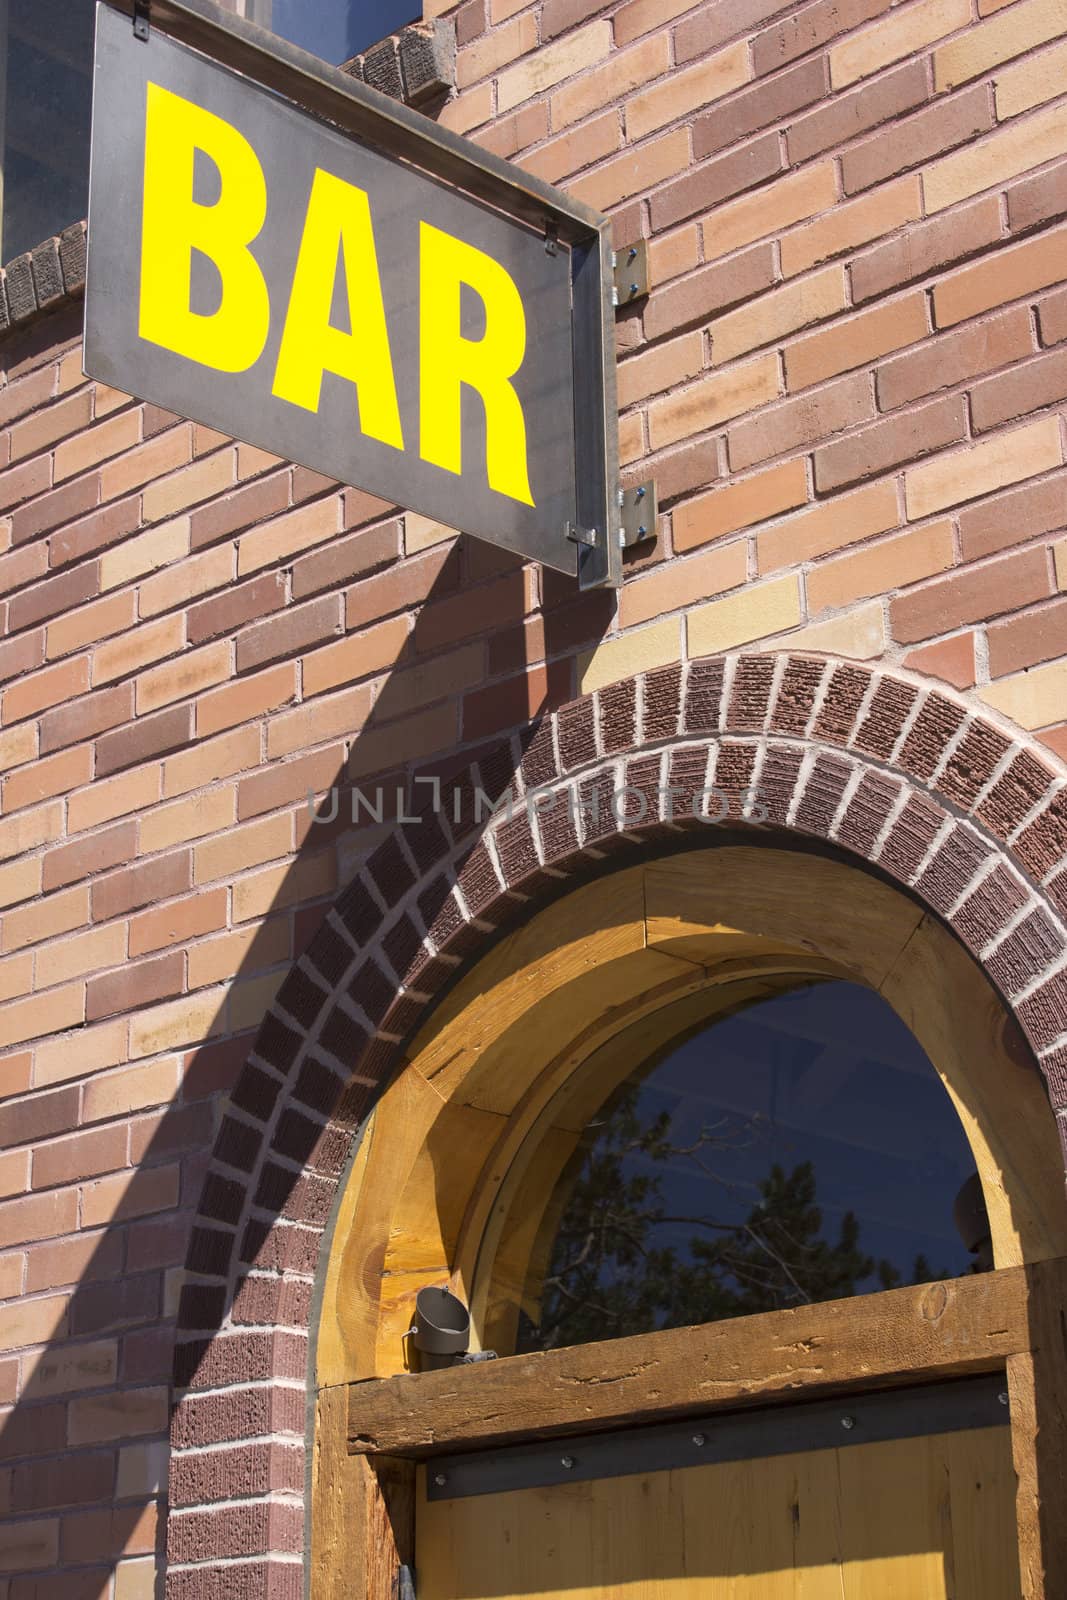 Bar sign door by jeremywhat